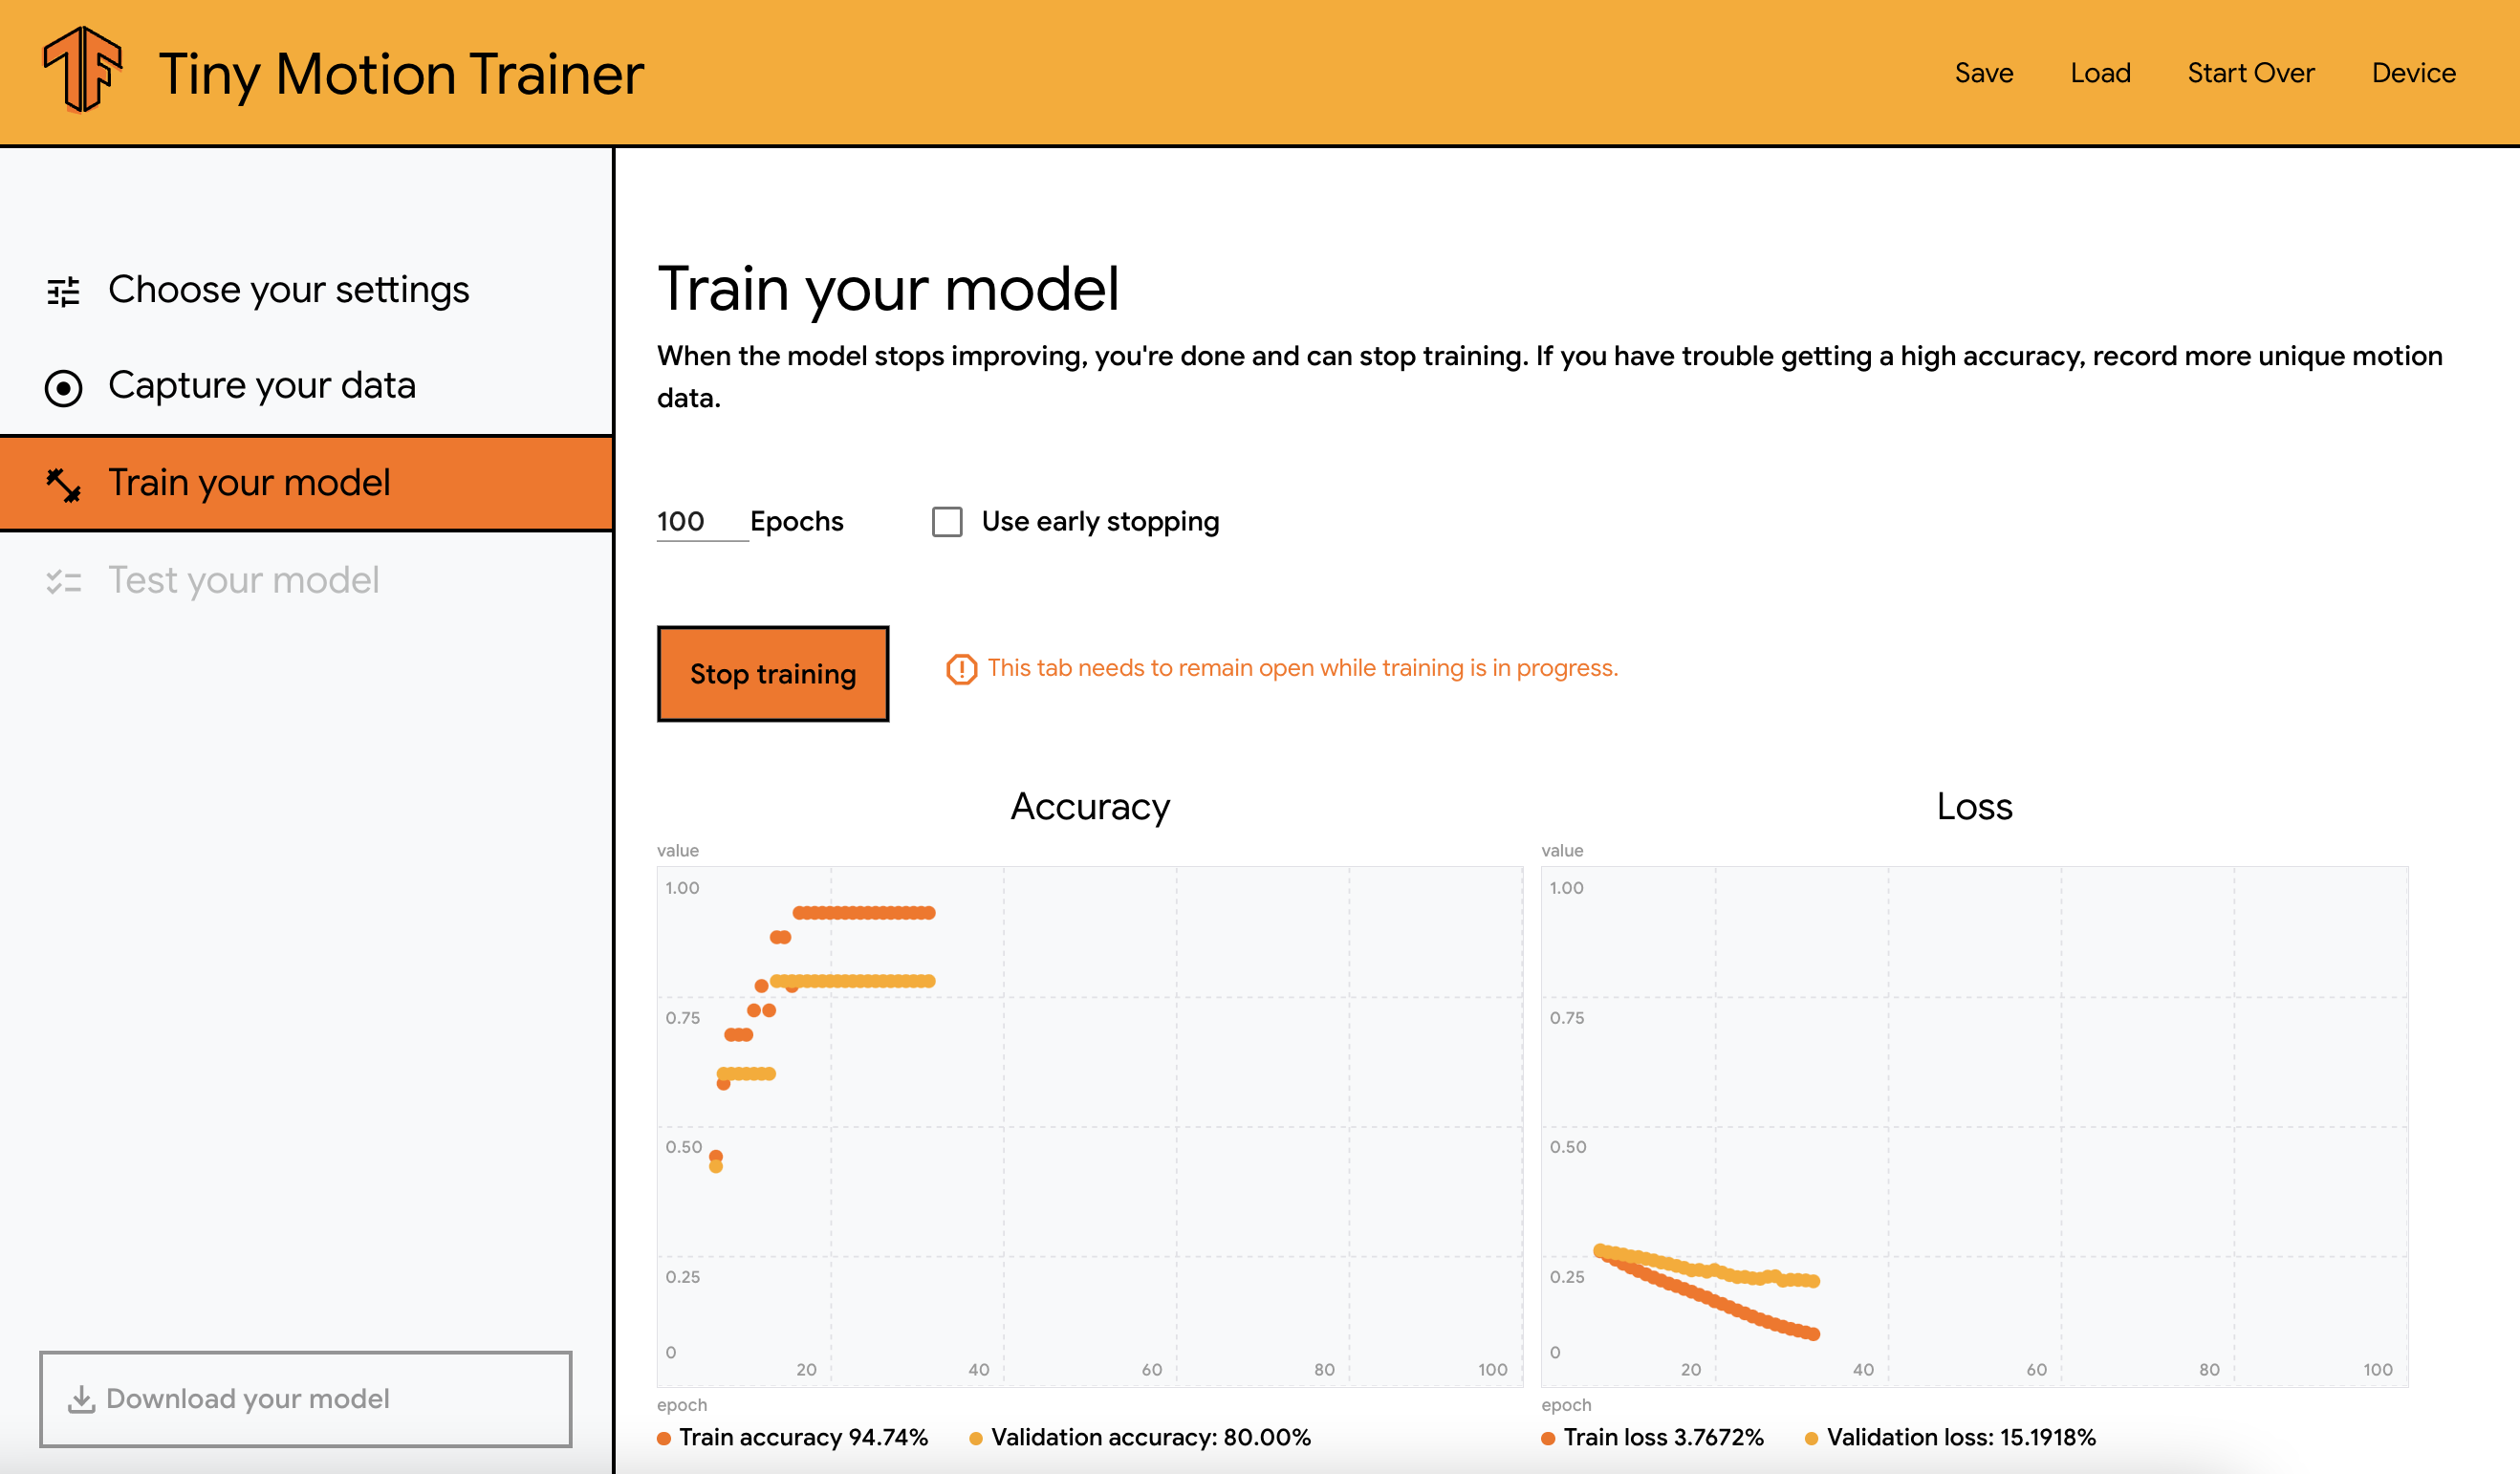 Screenshot of the training screen showing the graphs for accuracy and loss of the training process